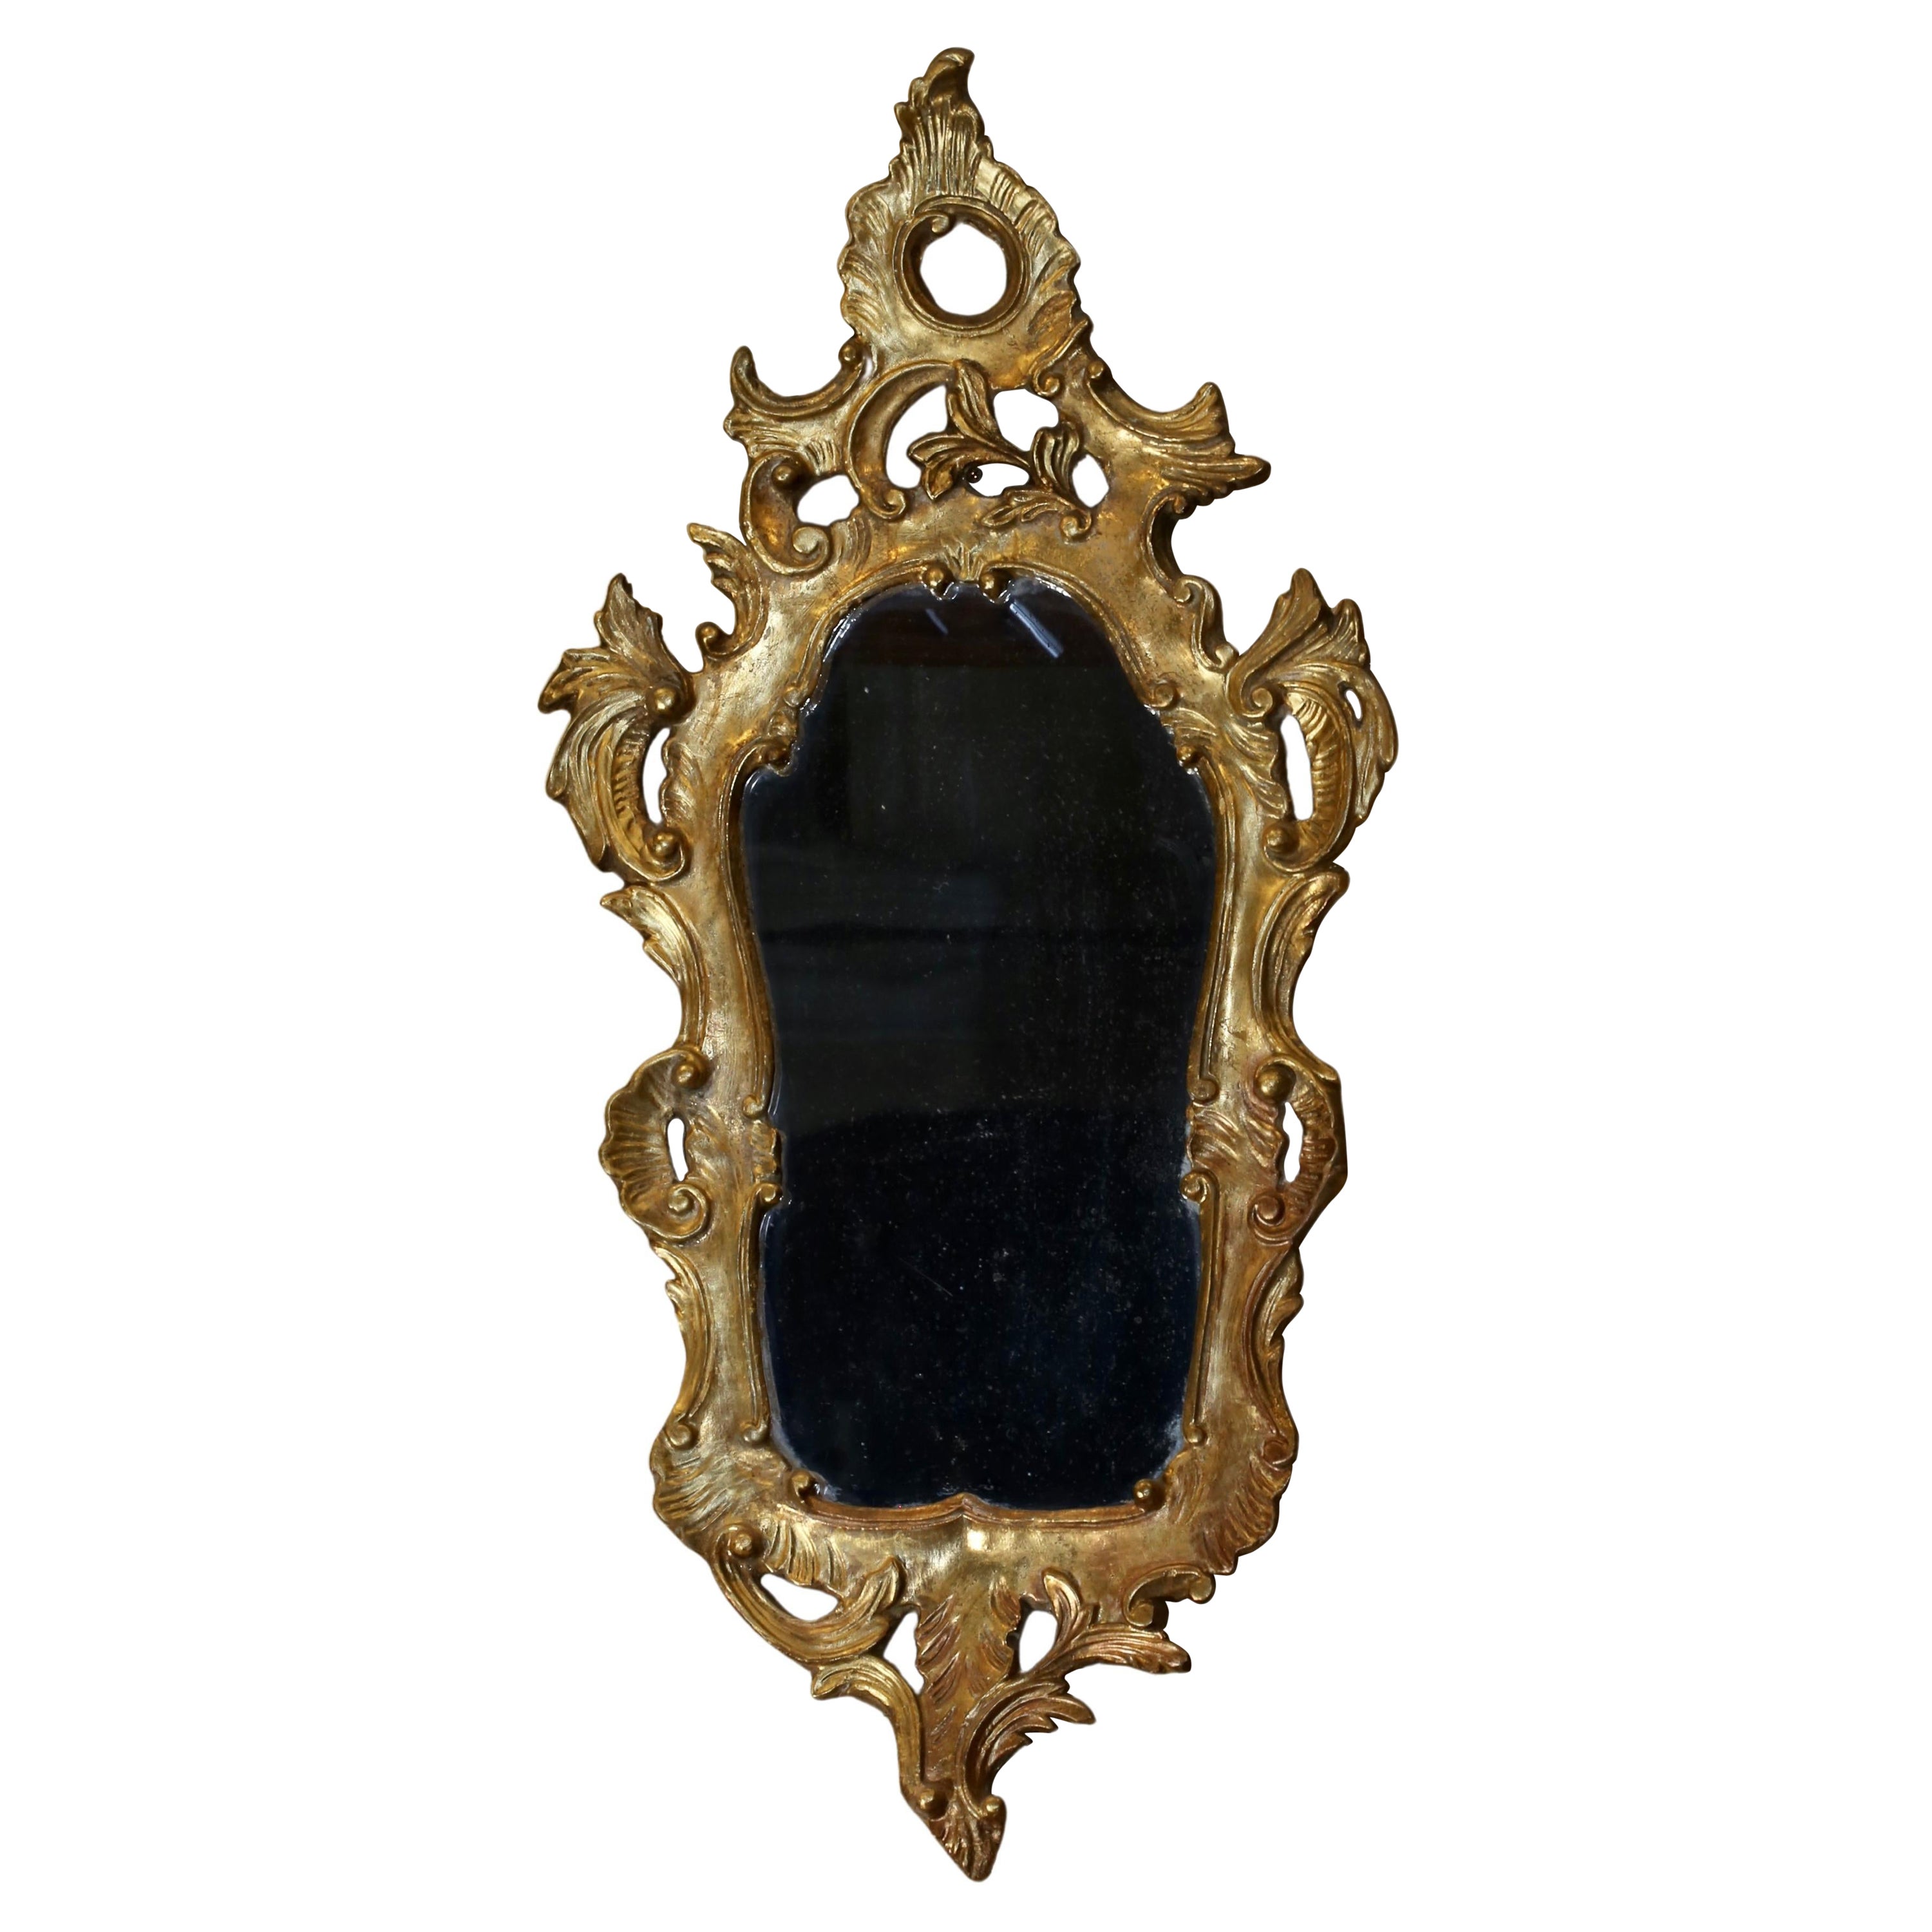 Sir Winston Churchill's Early 19th Century Wall Mirror, Christie's 2011 Auction